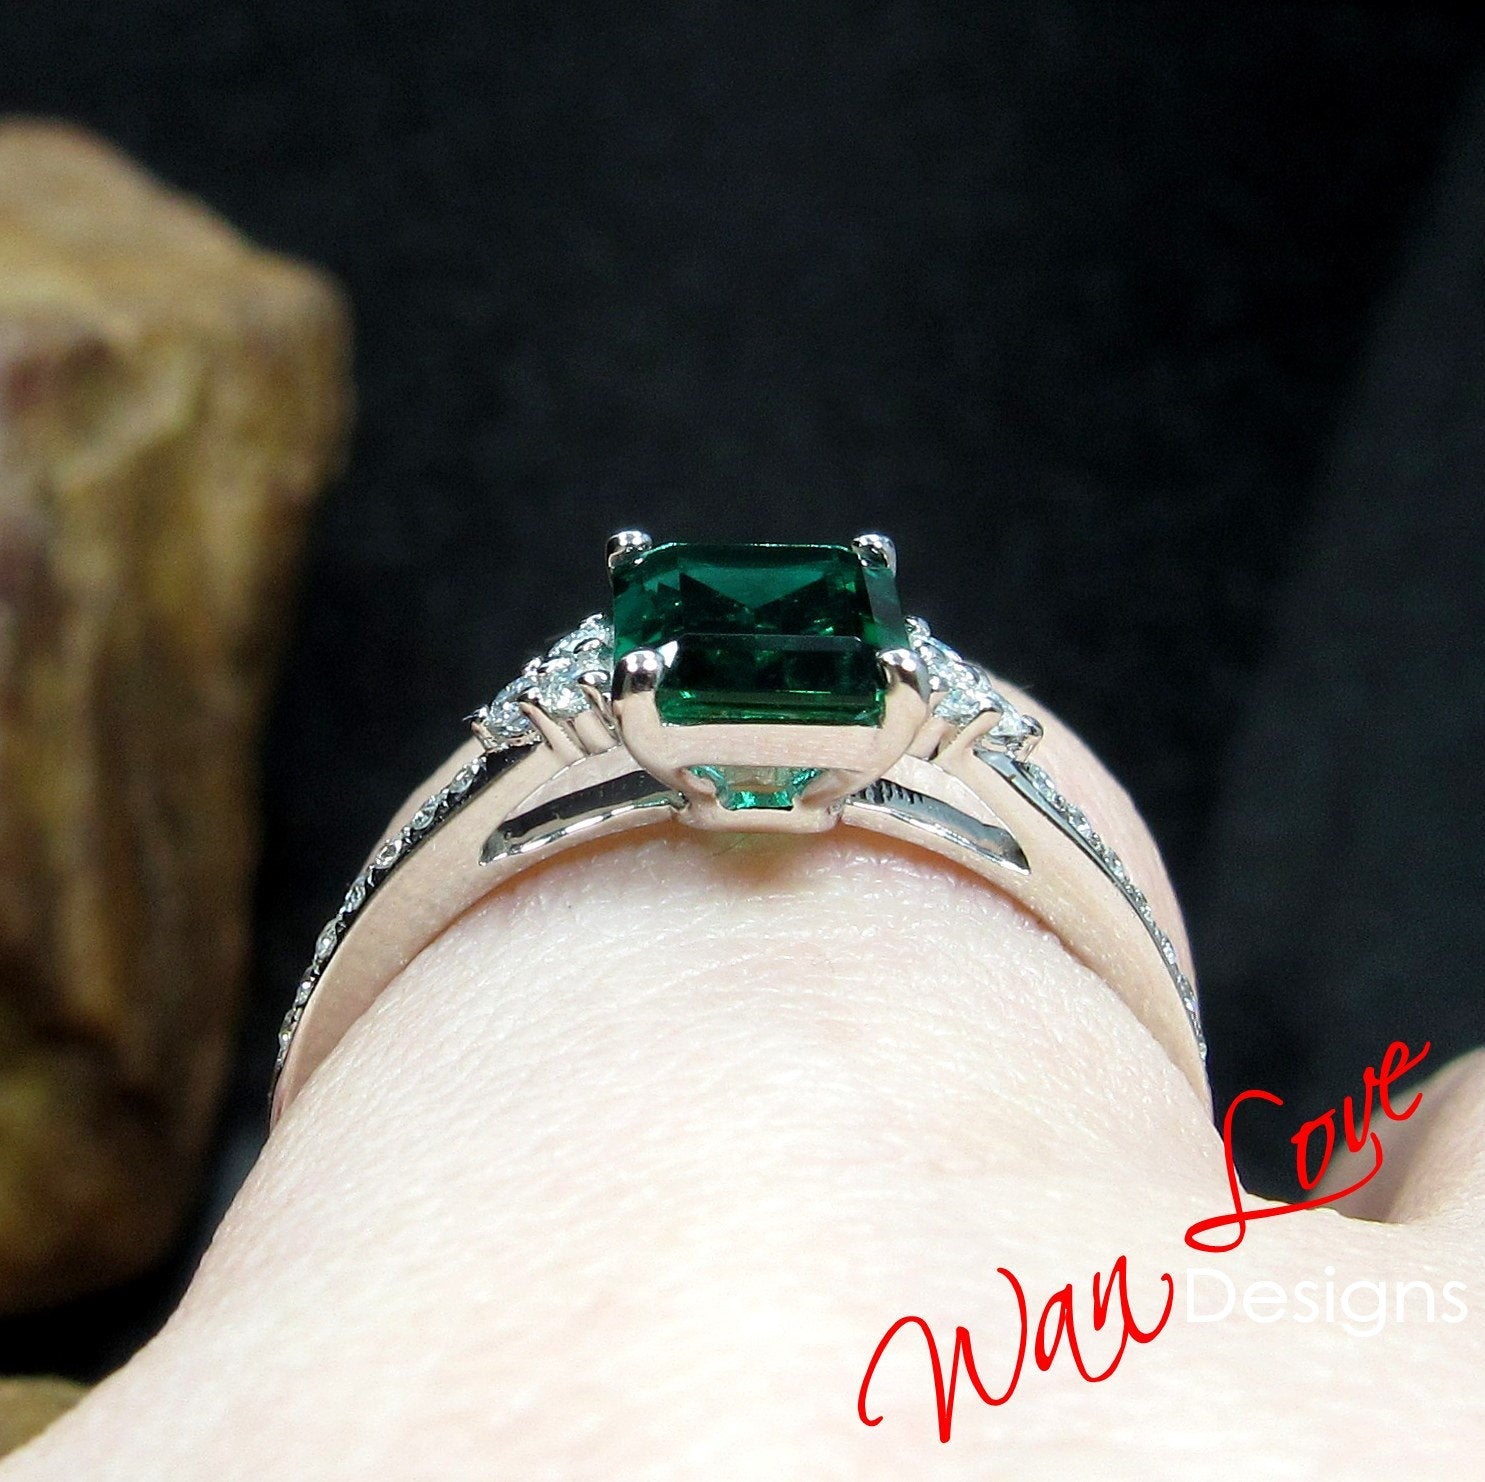 Emerald cut Alexandrite engagement ring vintage diamond Cluster gold engagement ring for women Bridal anniversary gift for her Wan Love Designs